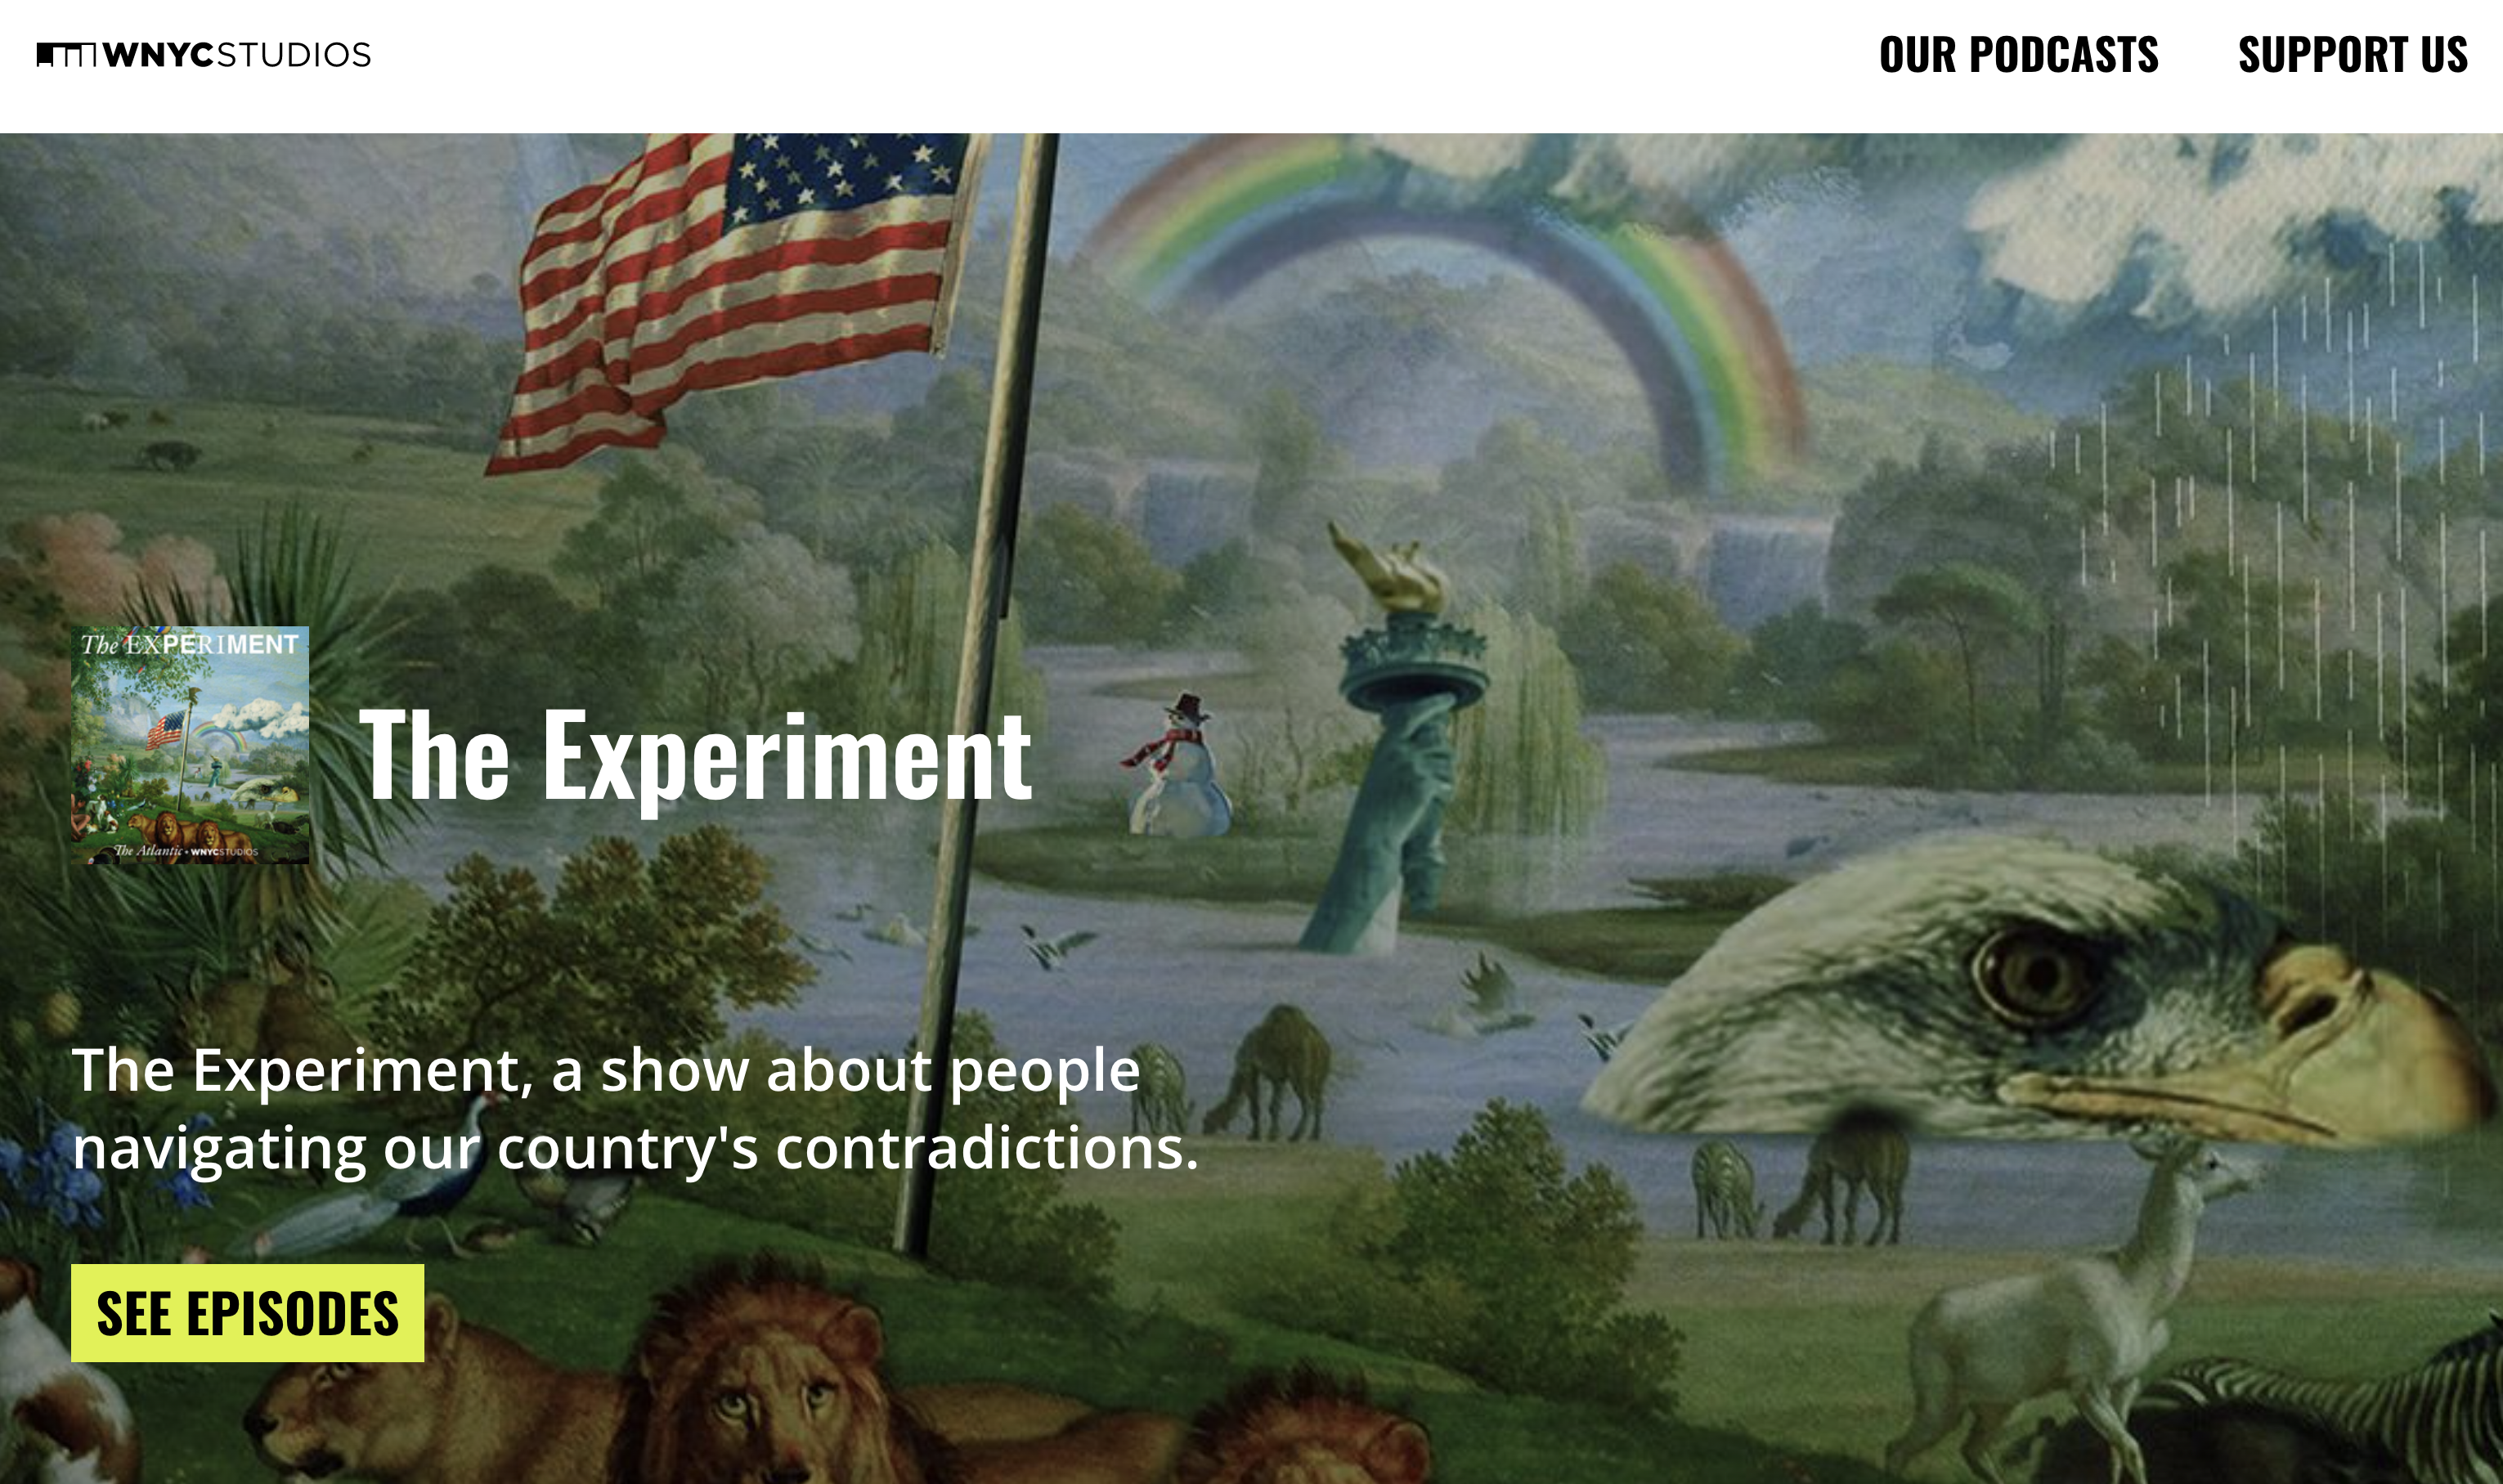 WYNC Studios homepage featuring podcast artwork for a podcast called The Experiment